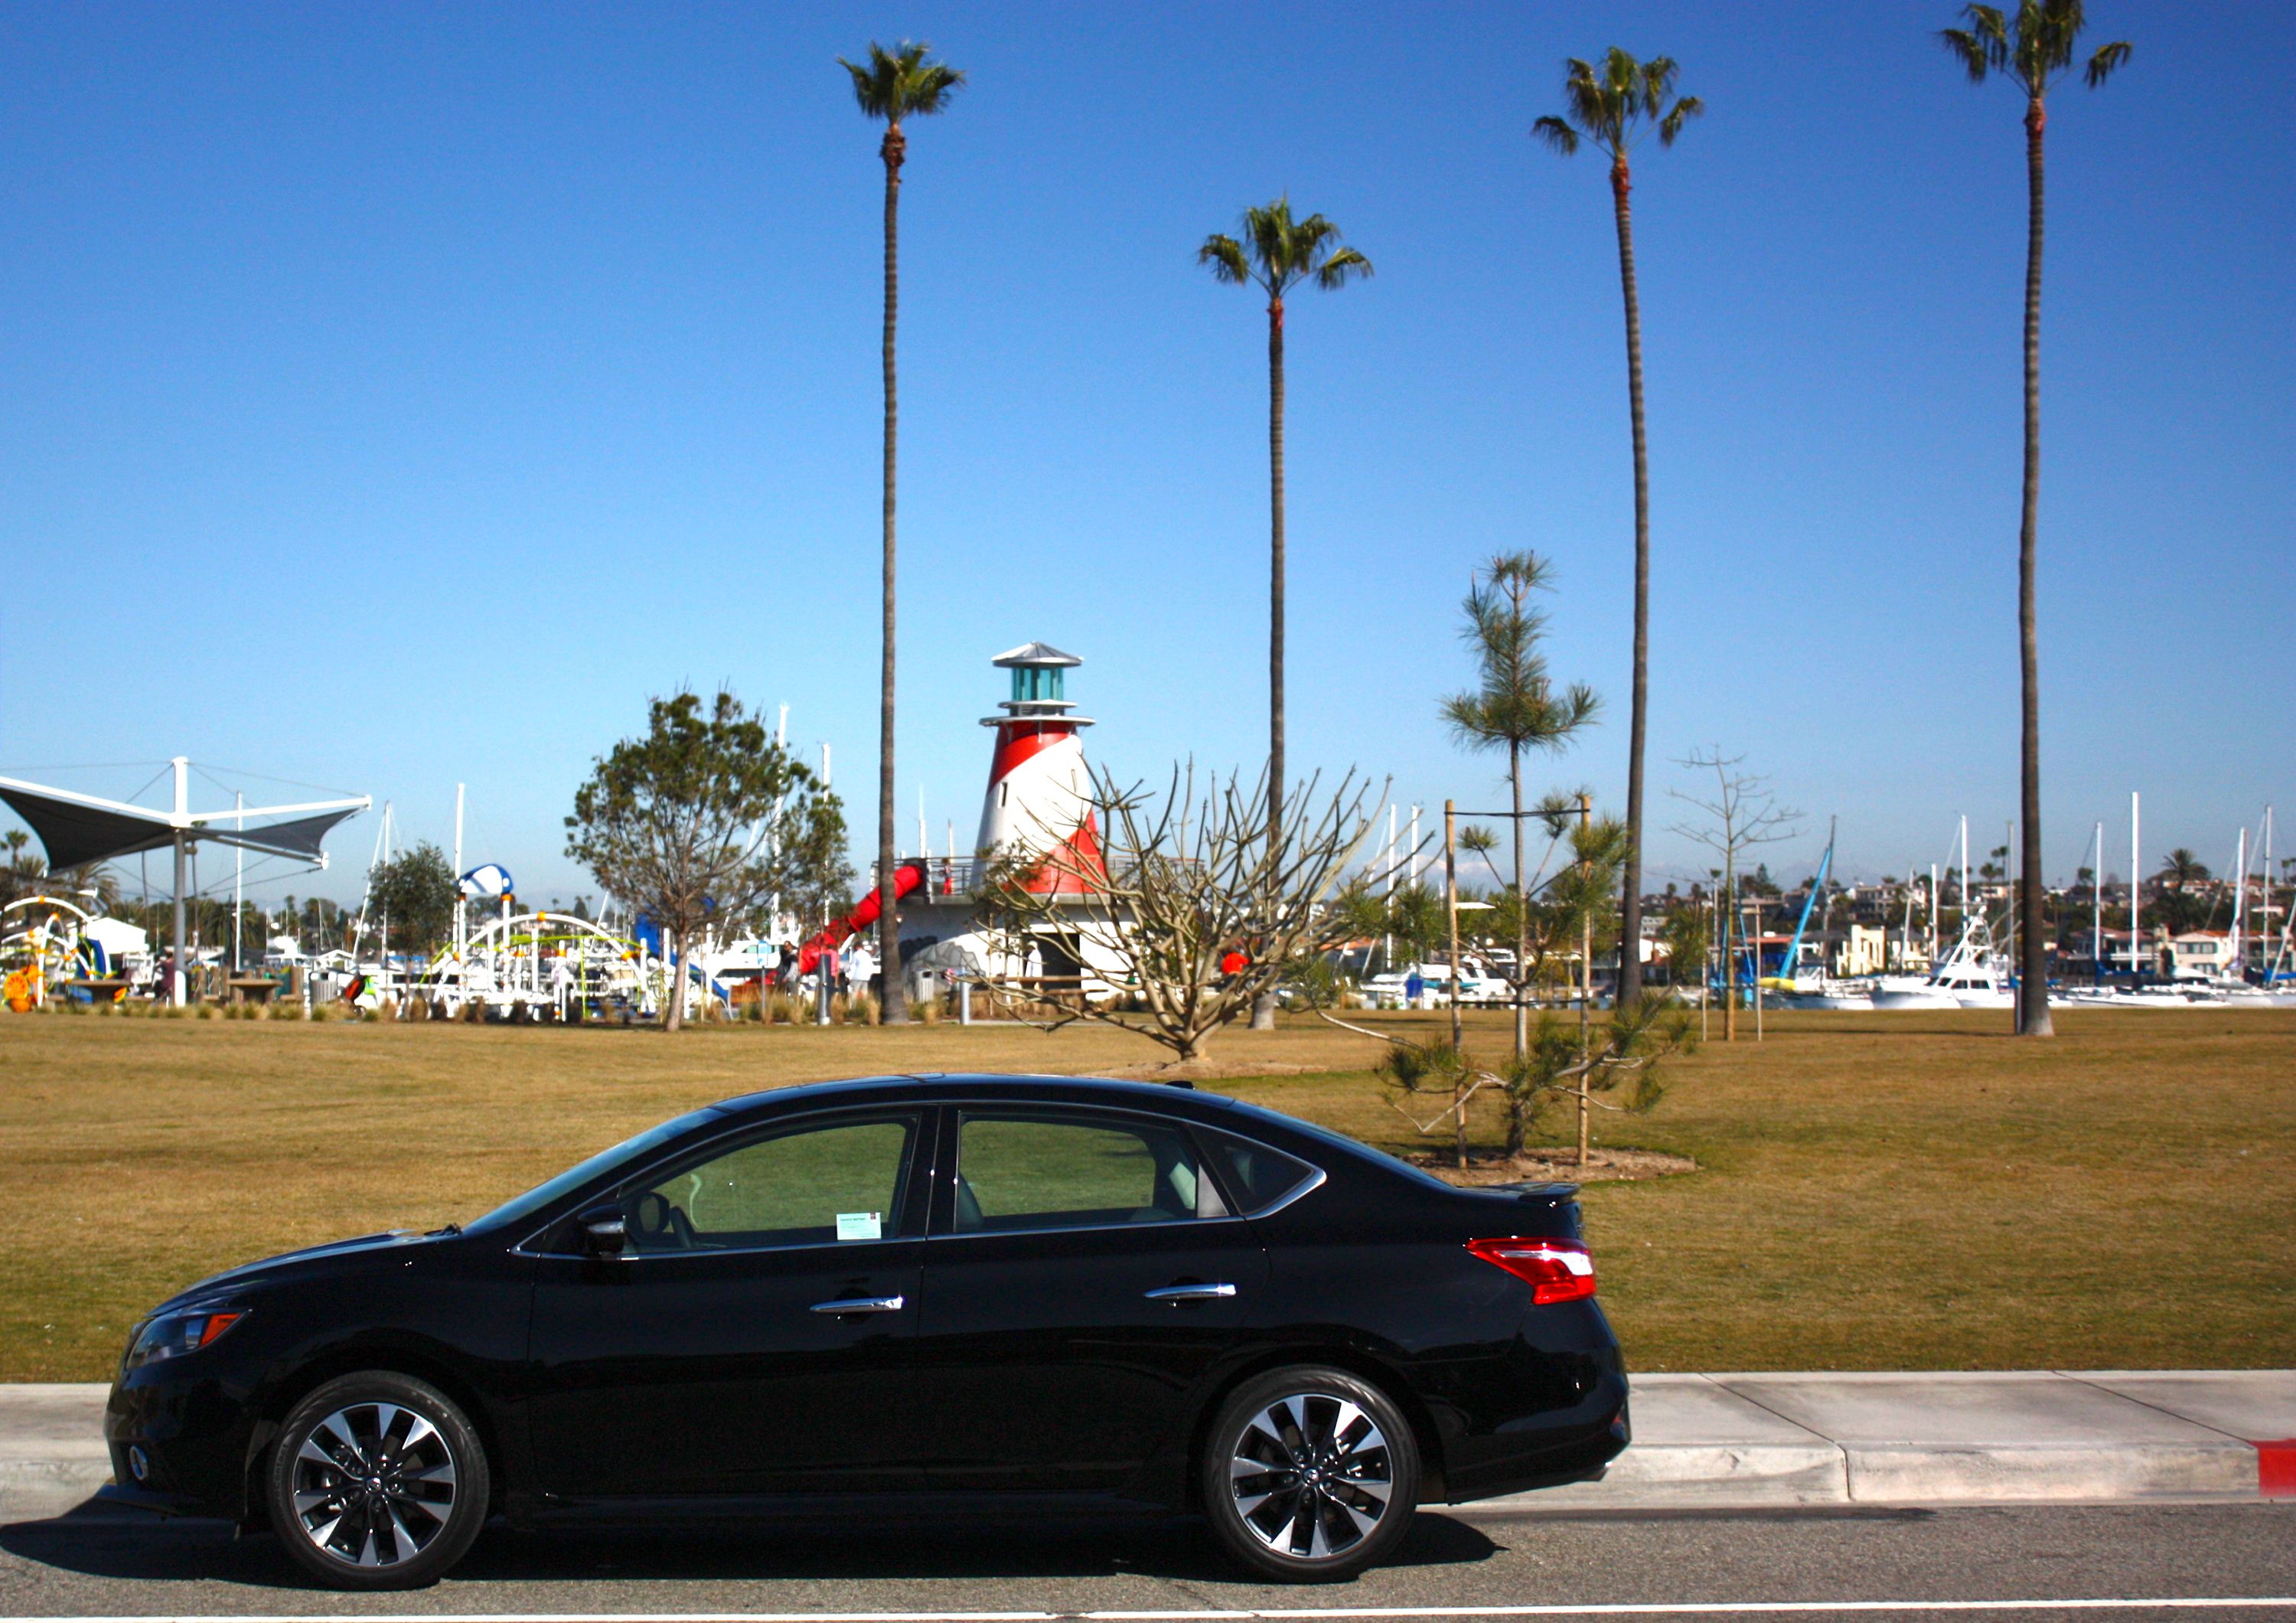 2016 Nissan Sentra – Driving Impression And Review